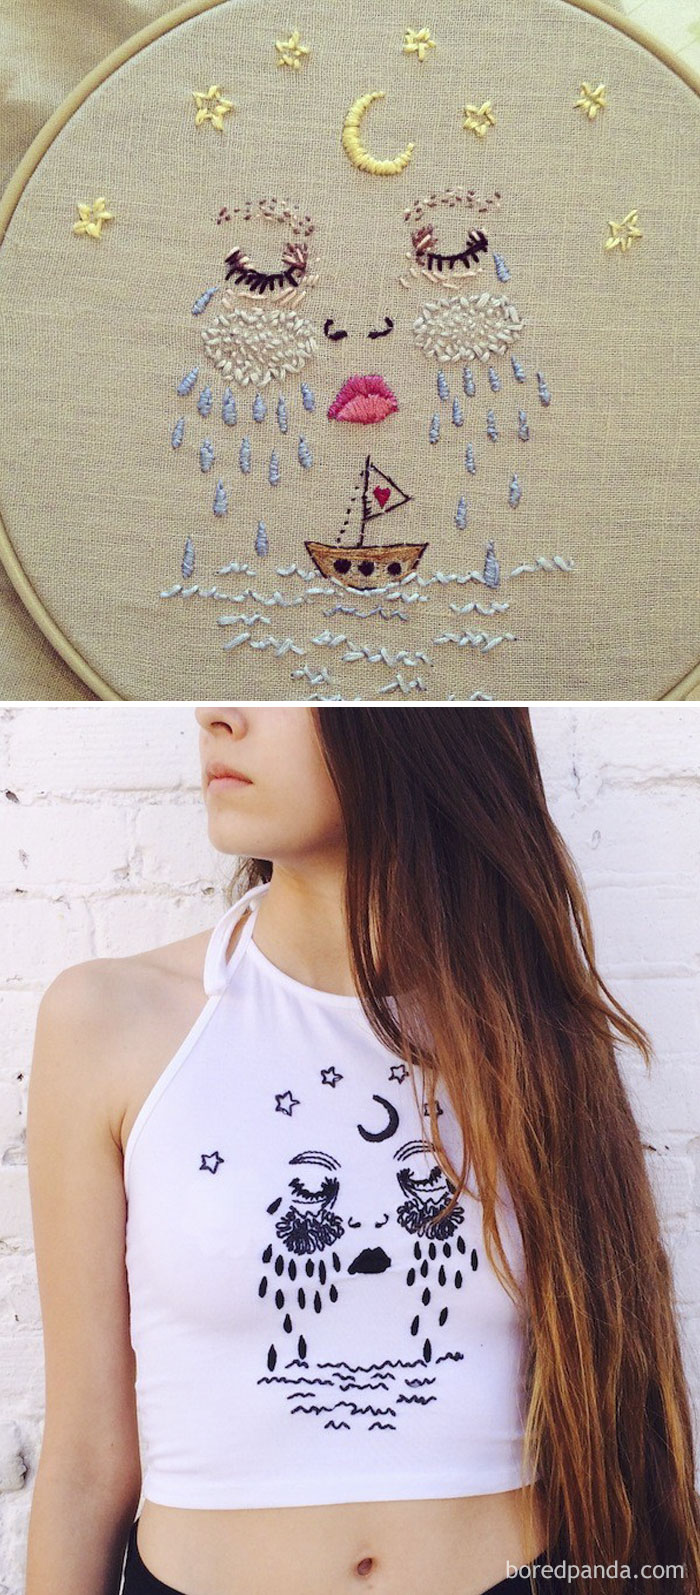 Fashion Label Brandy Melville Knocked Off The Artist Brain Foetus By Placing Her Embroidered Piece On Their Top